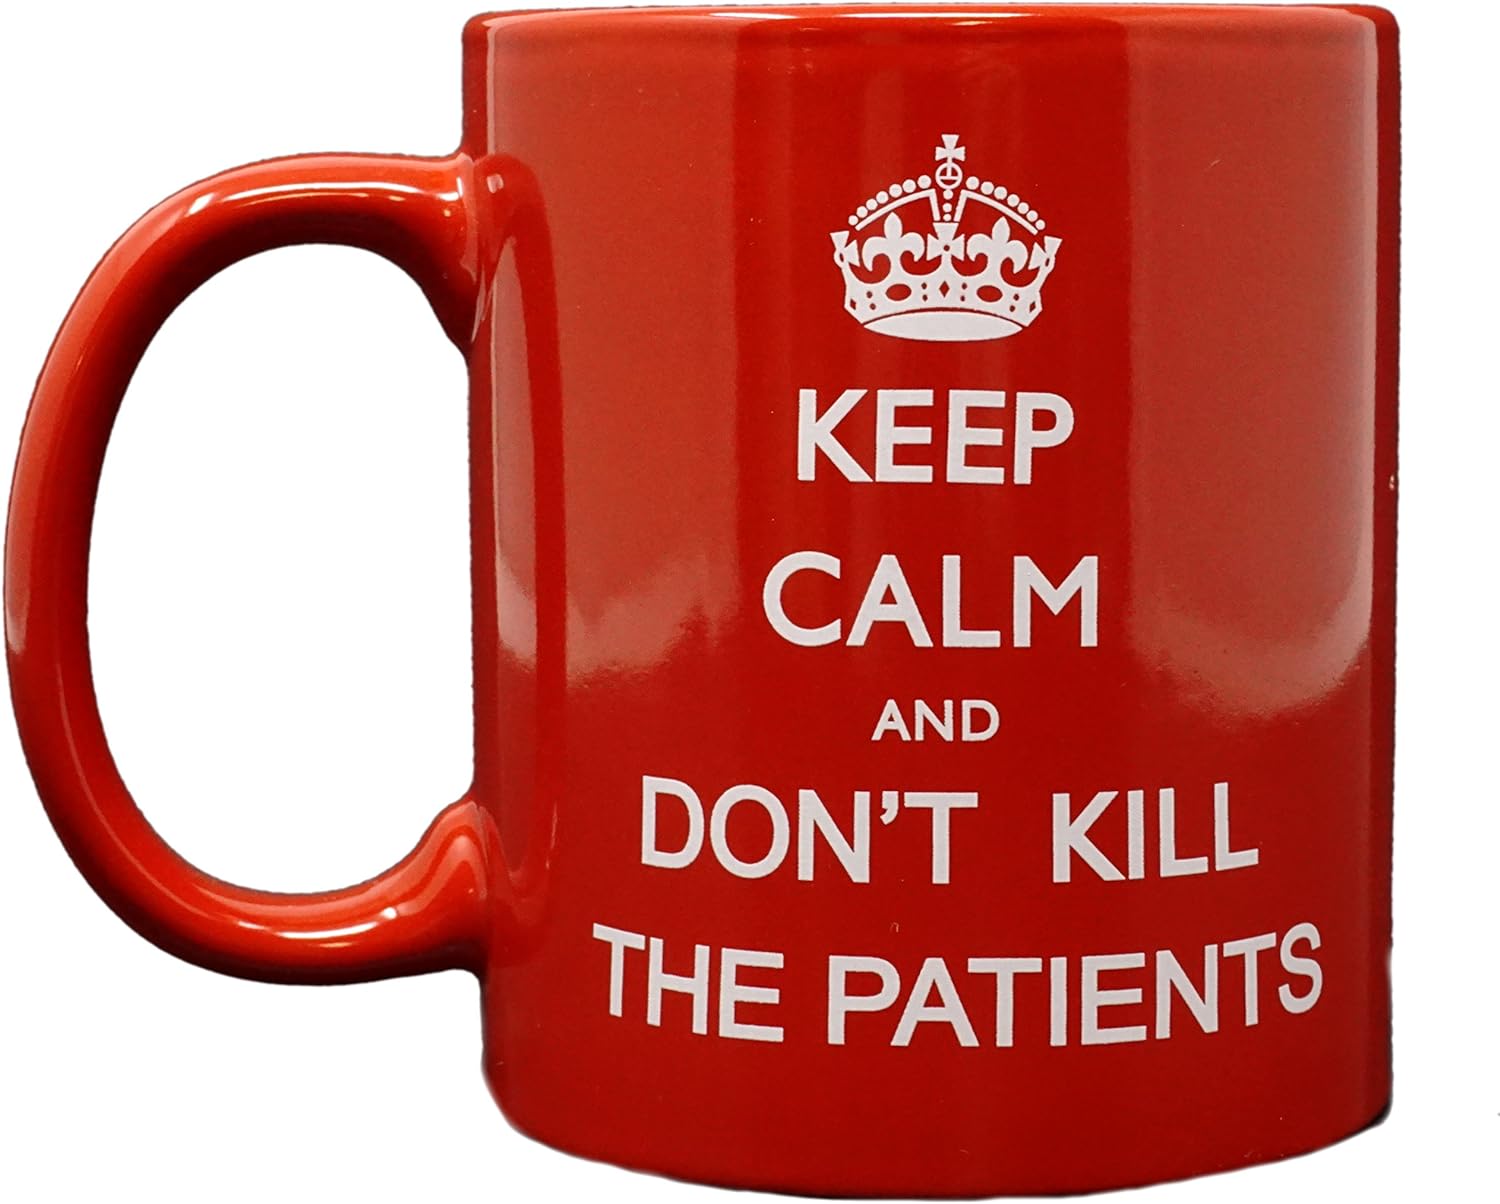 Funny Guy Mugs Keep Calm and Don't Kill The Patients Ceramic Coffee Mug